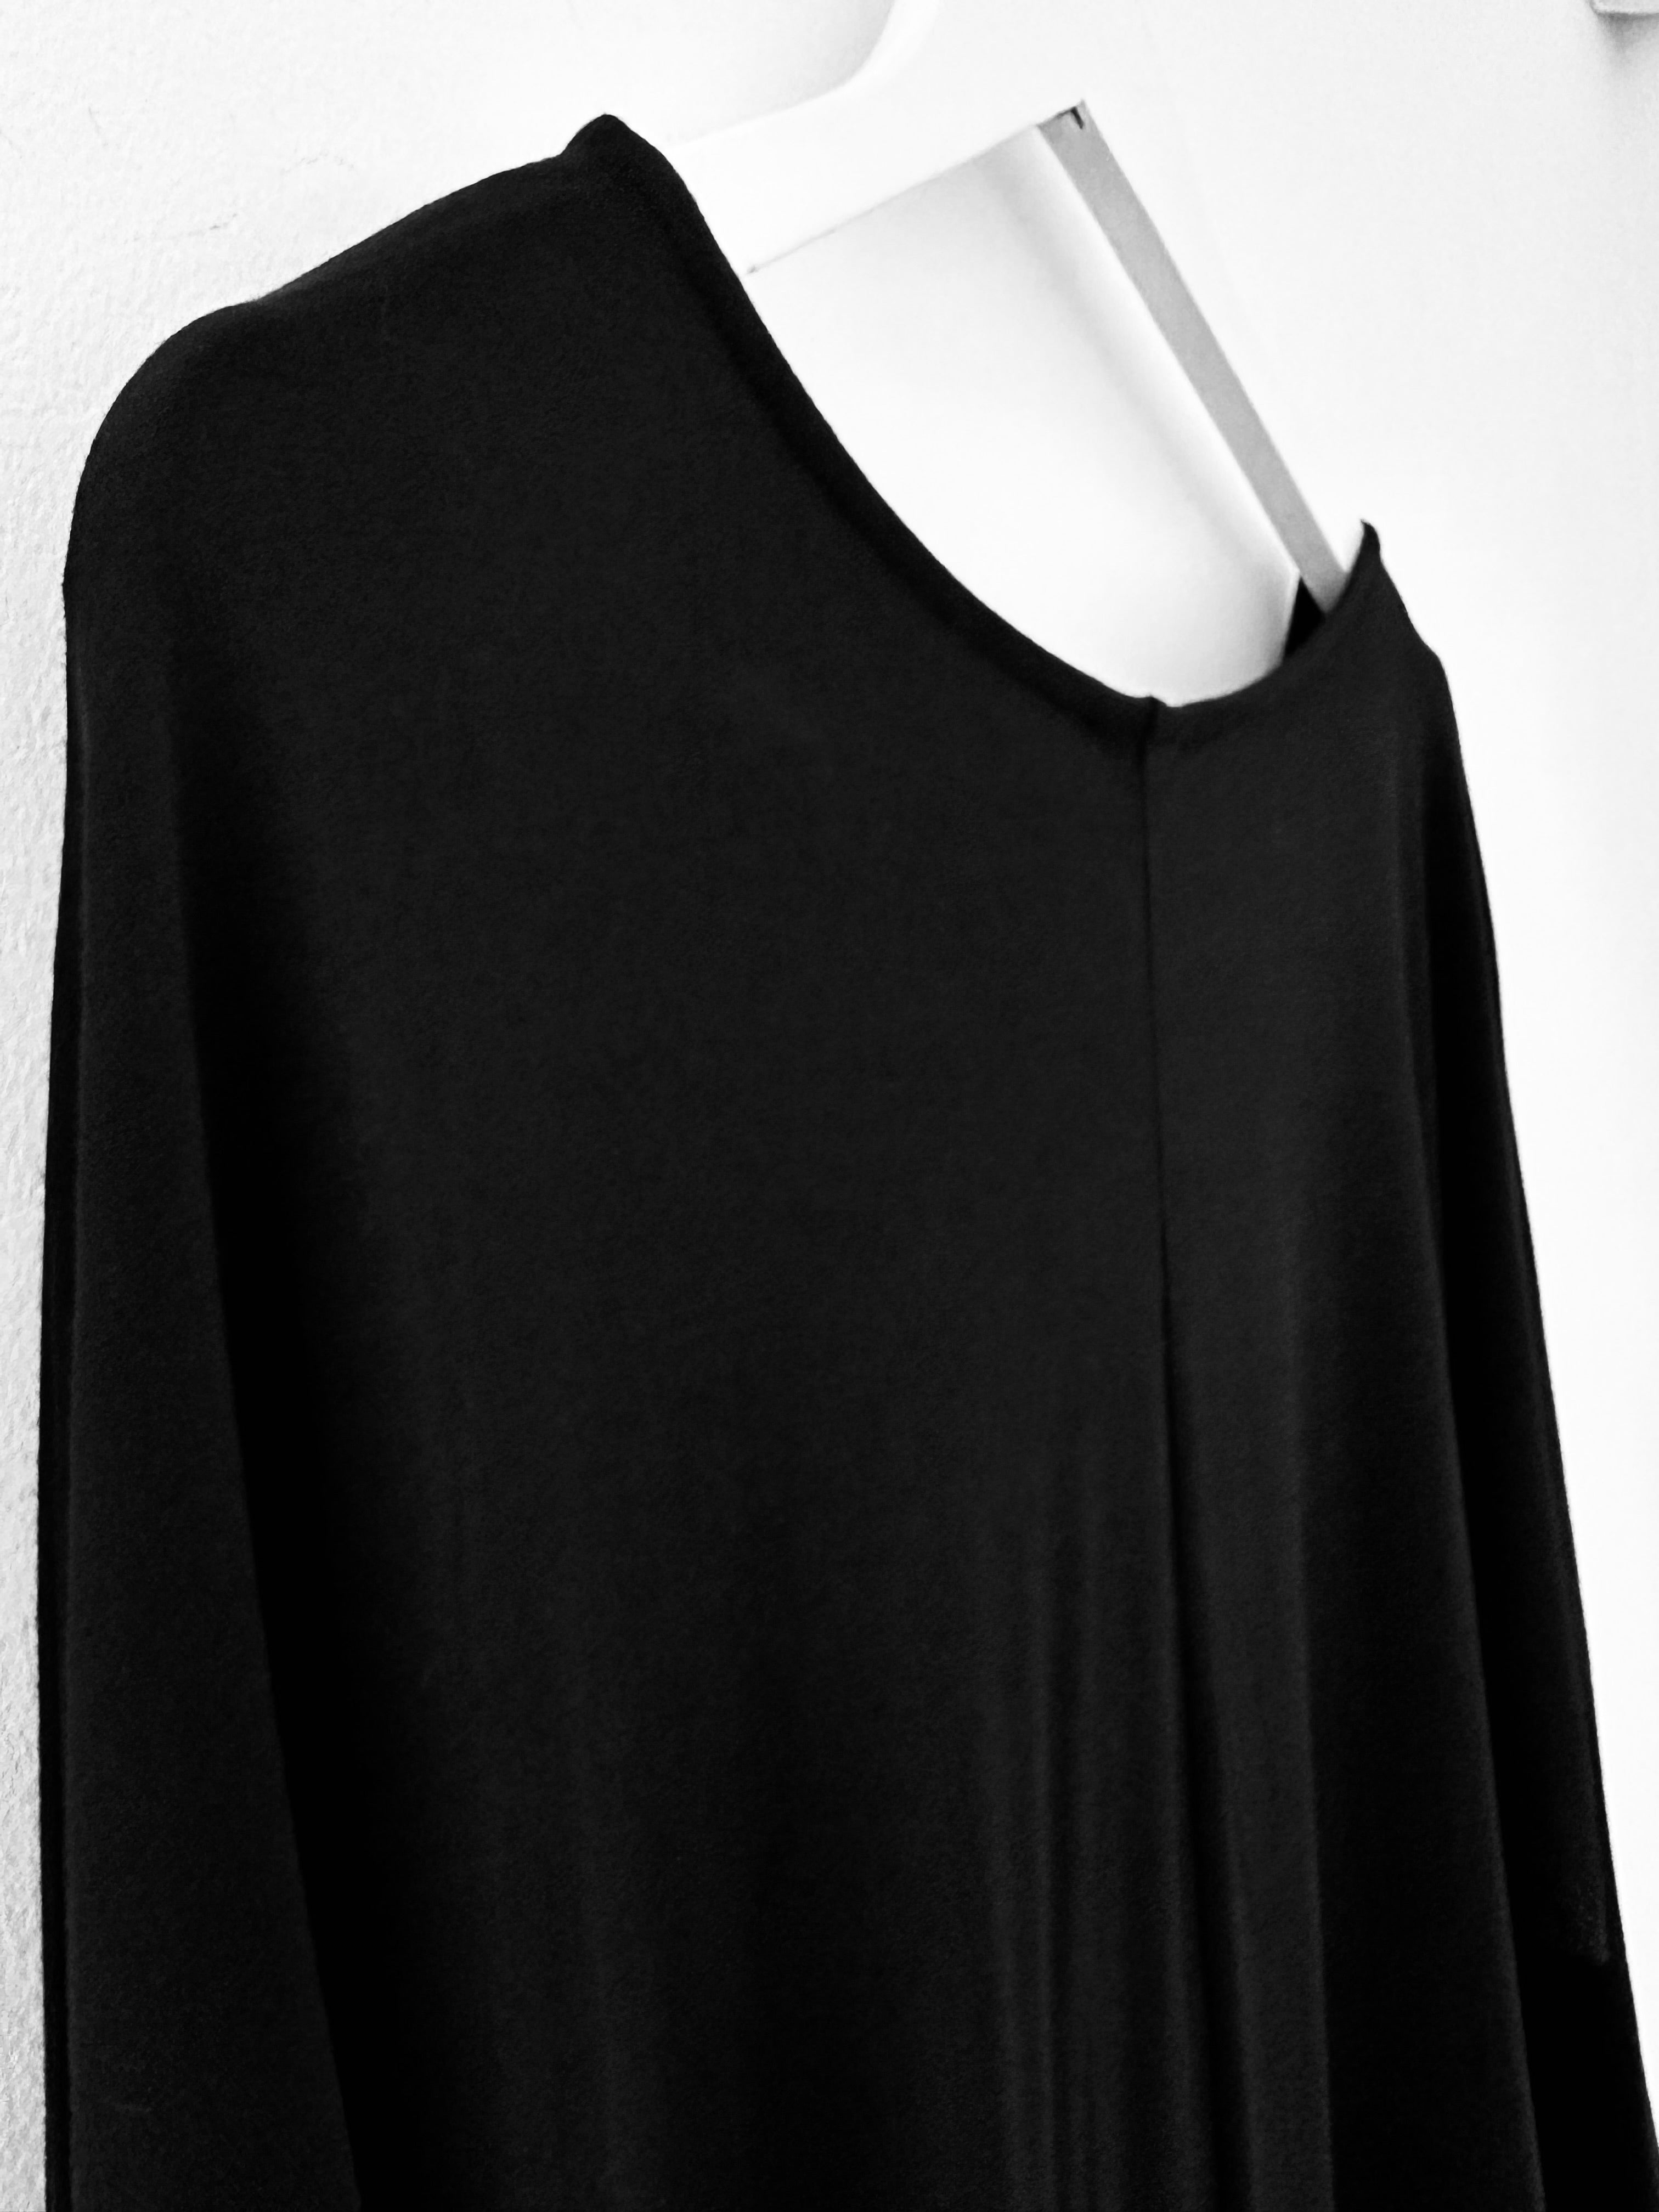 Bamboo Jersey Batwing Top in Black